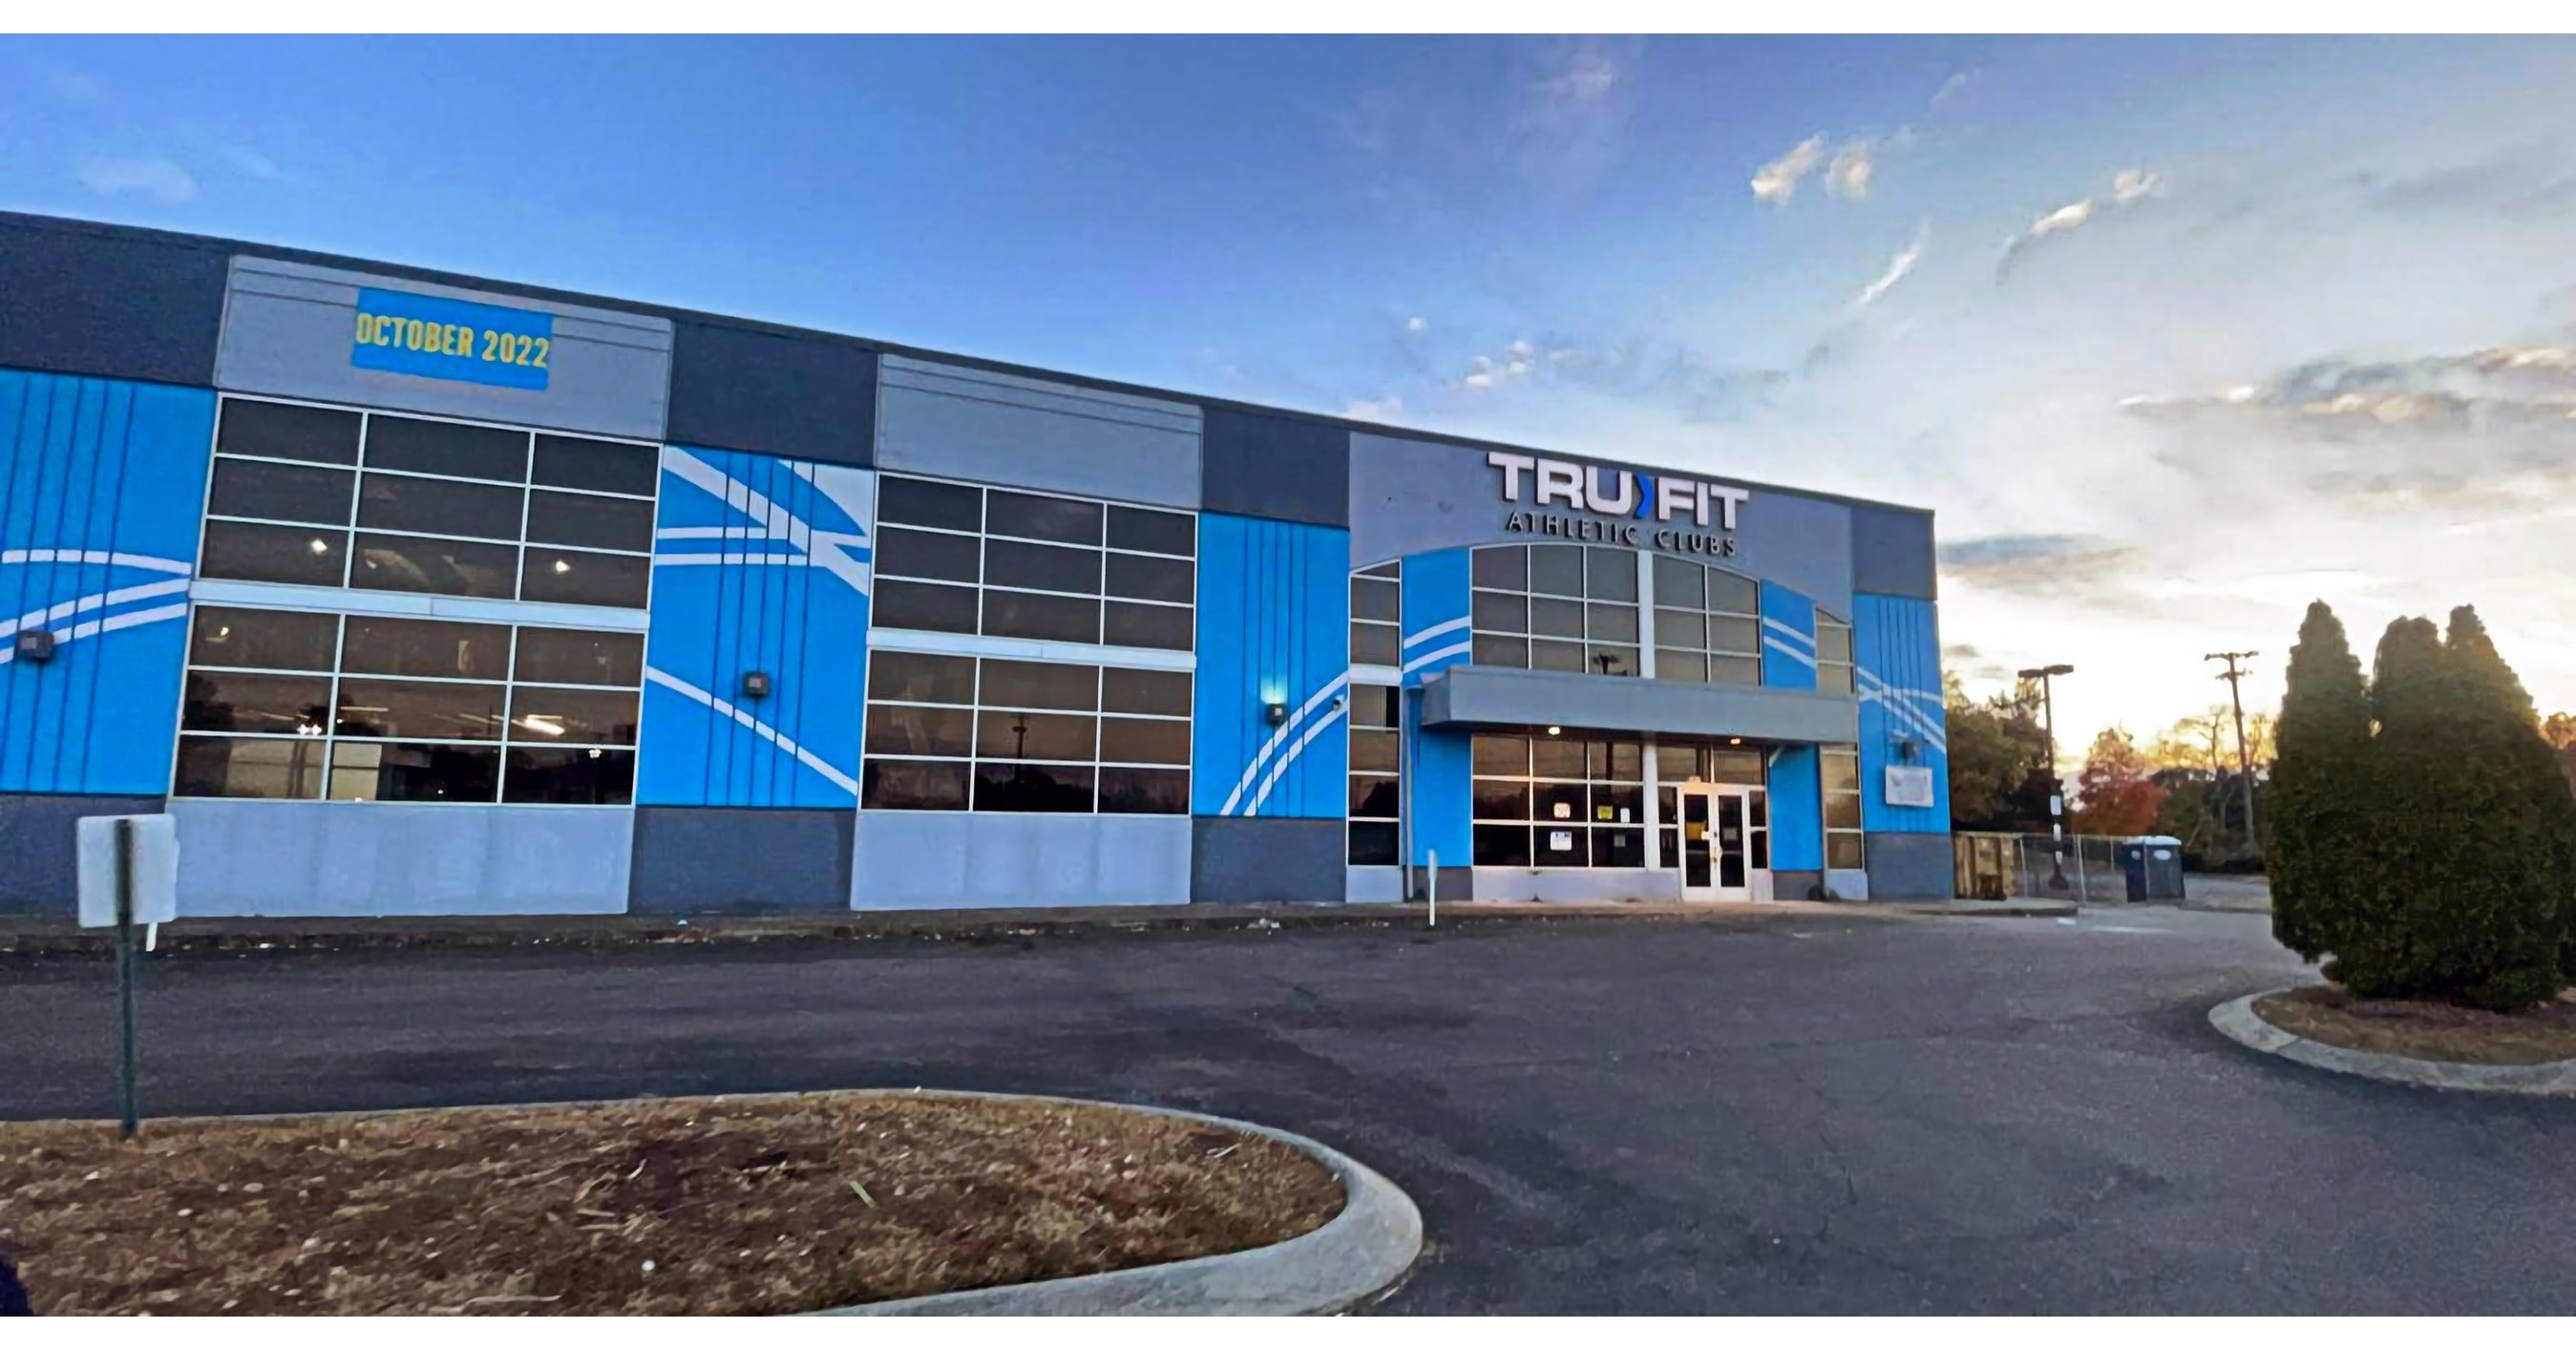 TRUFIT ATHLETIC CLUBS ARE OPENING ACROSS TENNESSEE AND PARTNERING